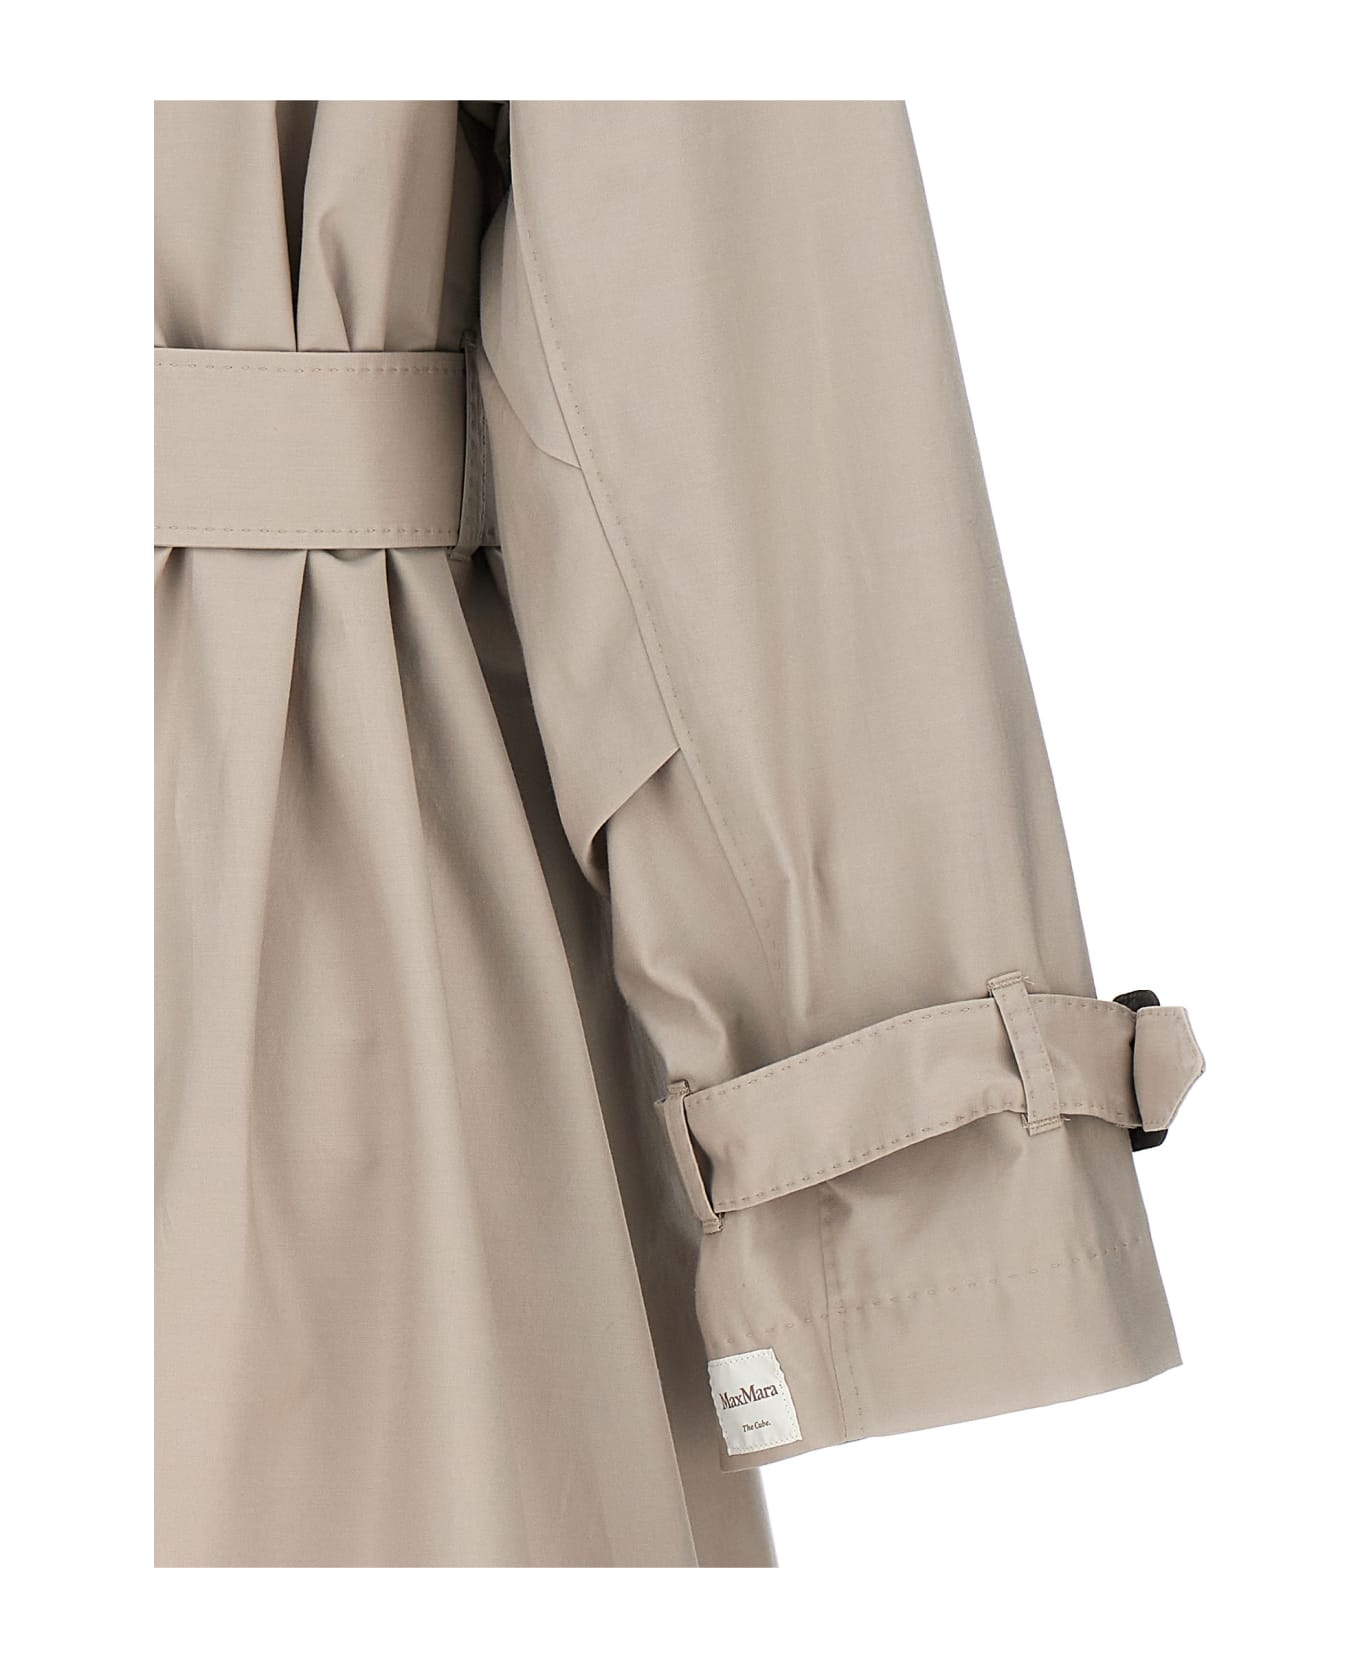 Max Mara The Cube 'titrench' Trench Coat - Beige レインコート